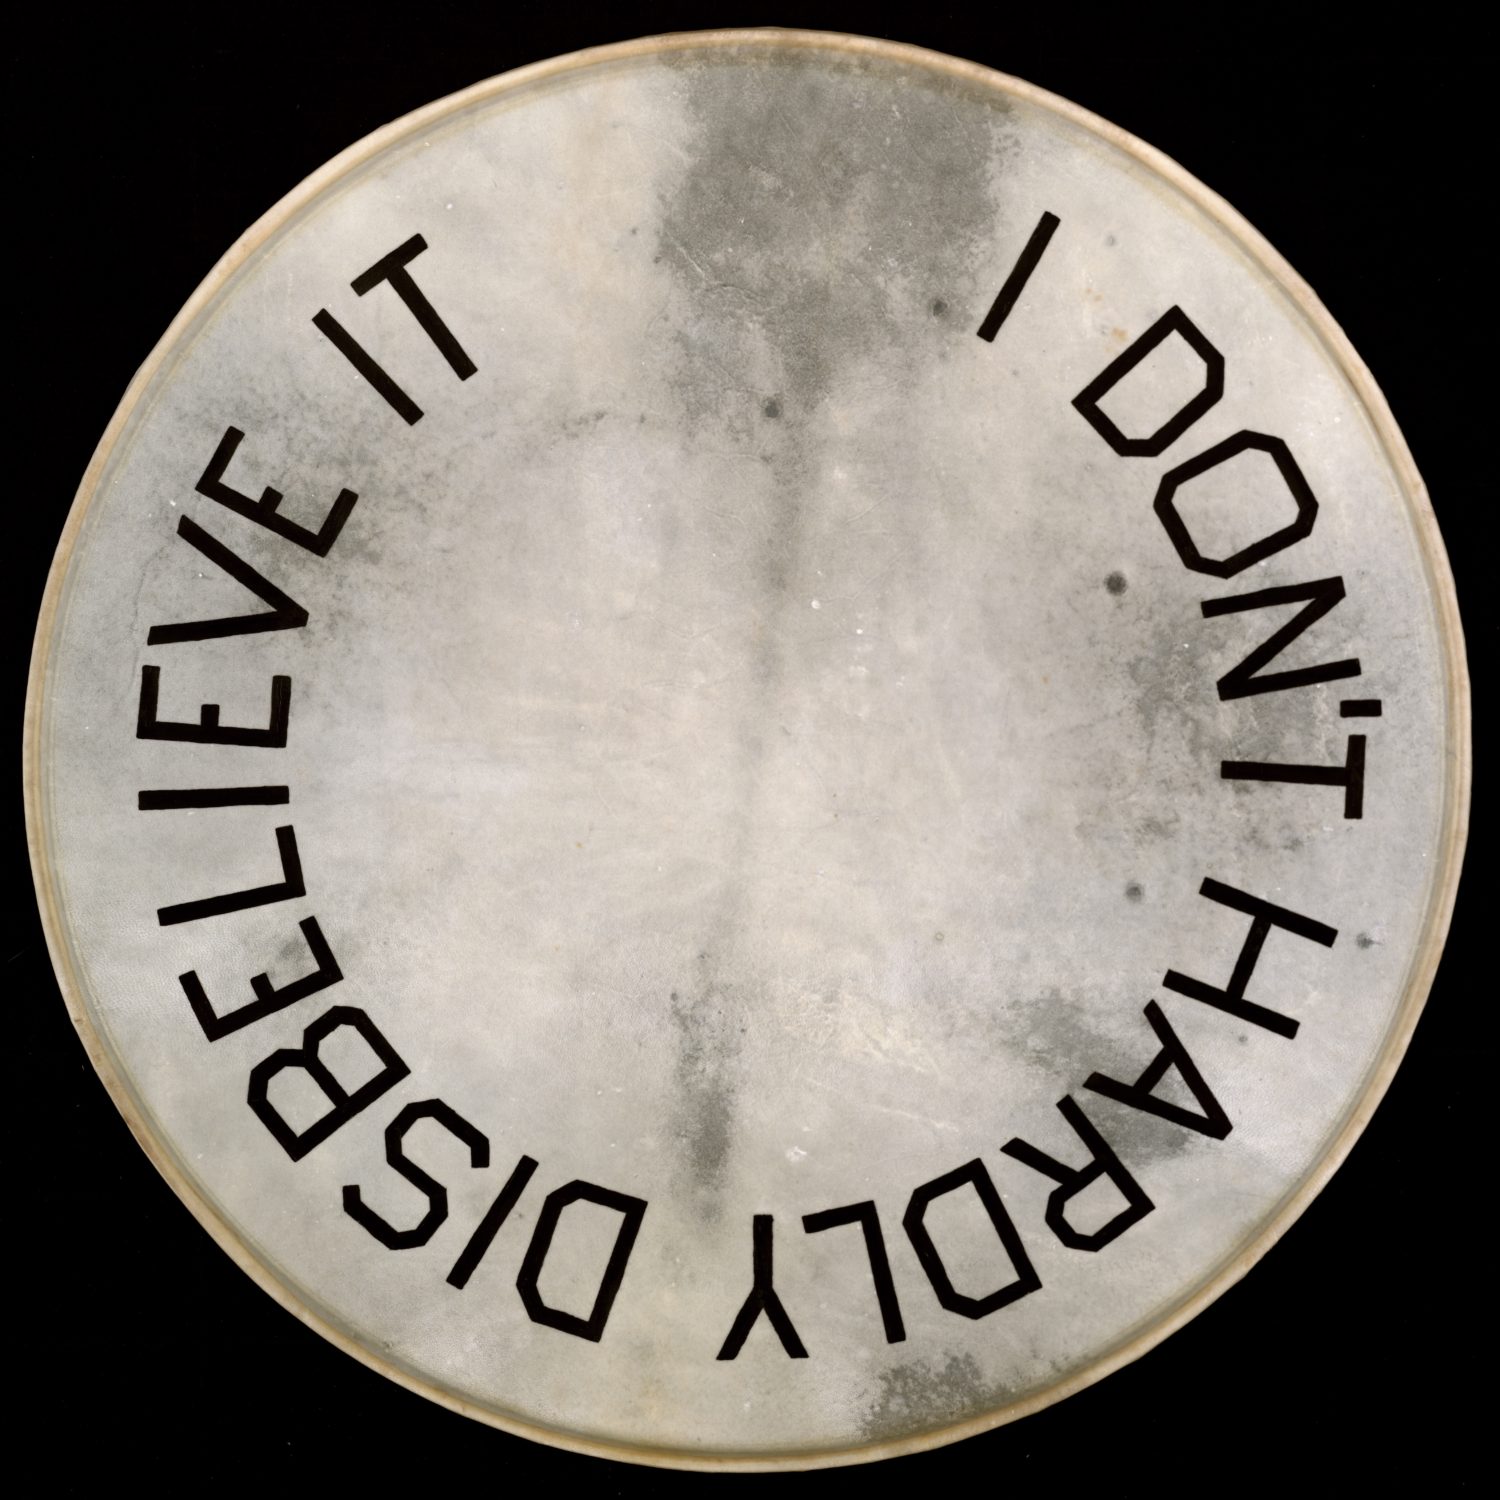 Artwork by Ed Ruscha, a drumskin head with "I Don’t Hardly Disbelieve It" painted on it